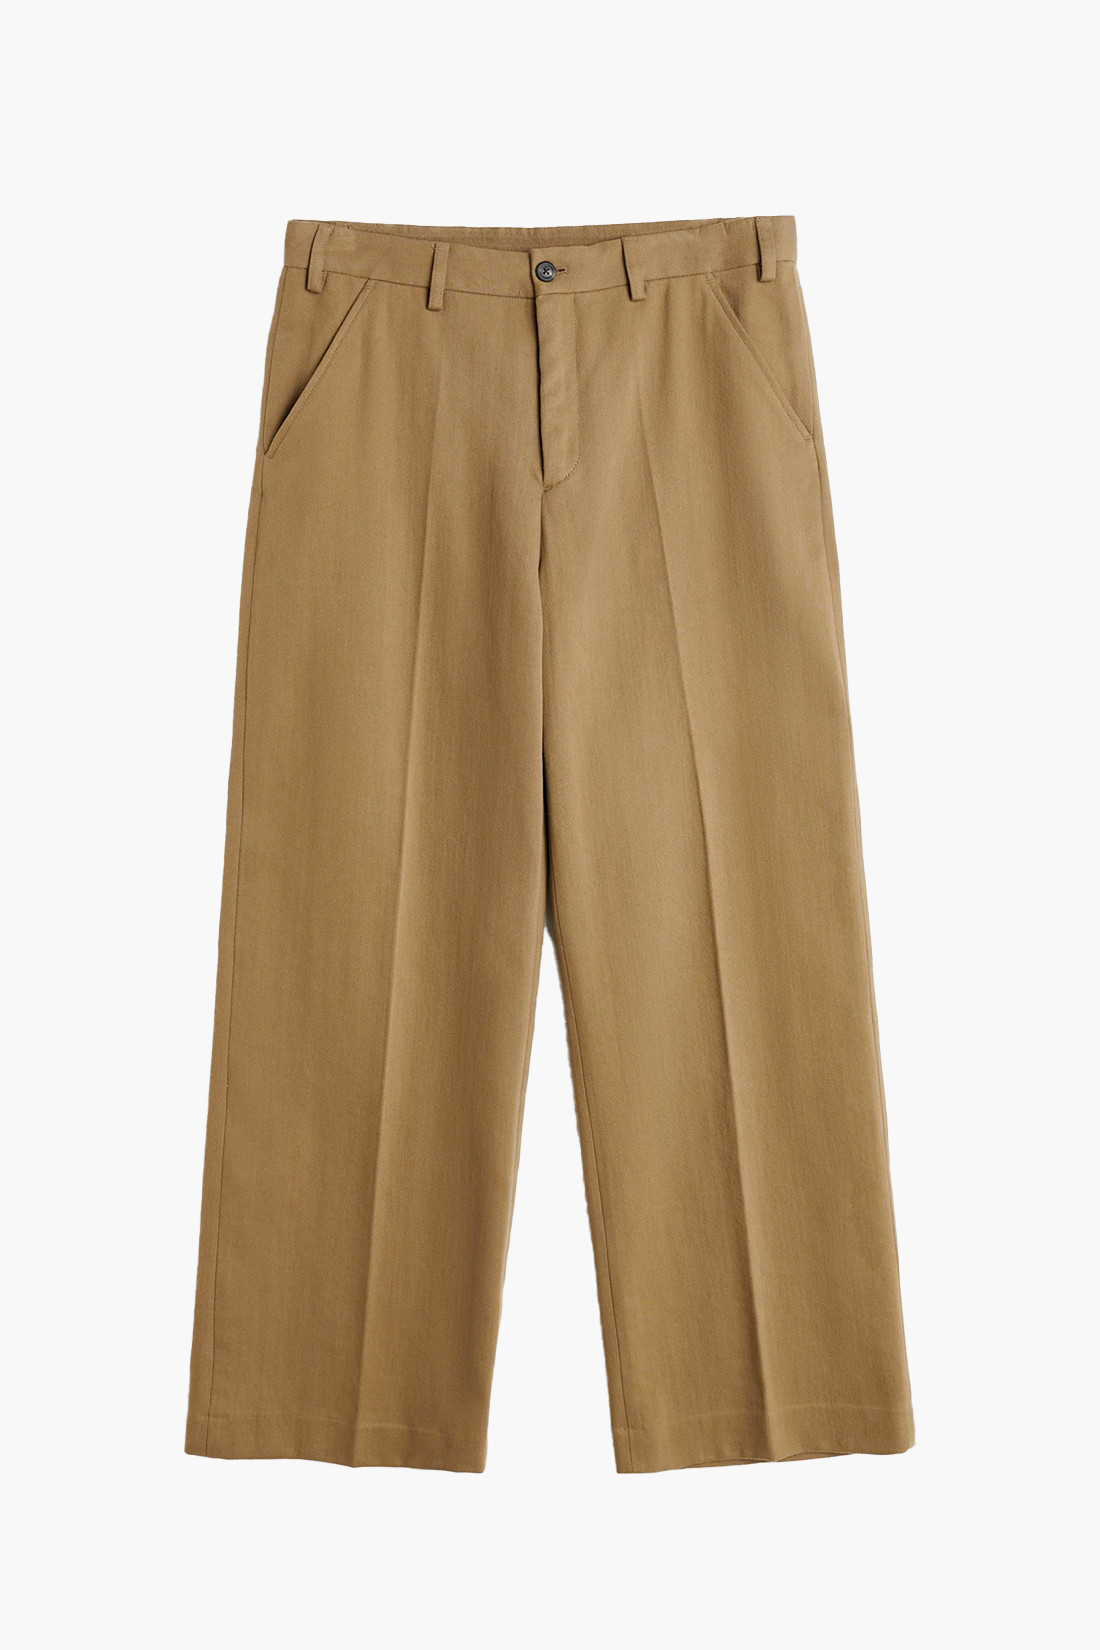 Shop Latest Pine Olive Chino Pants Mens Online in India